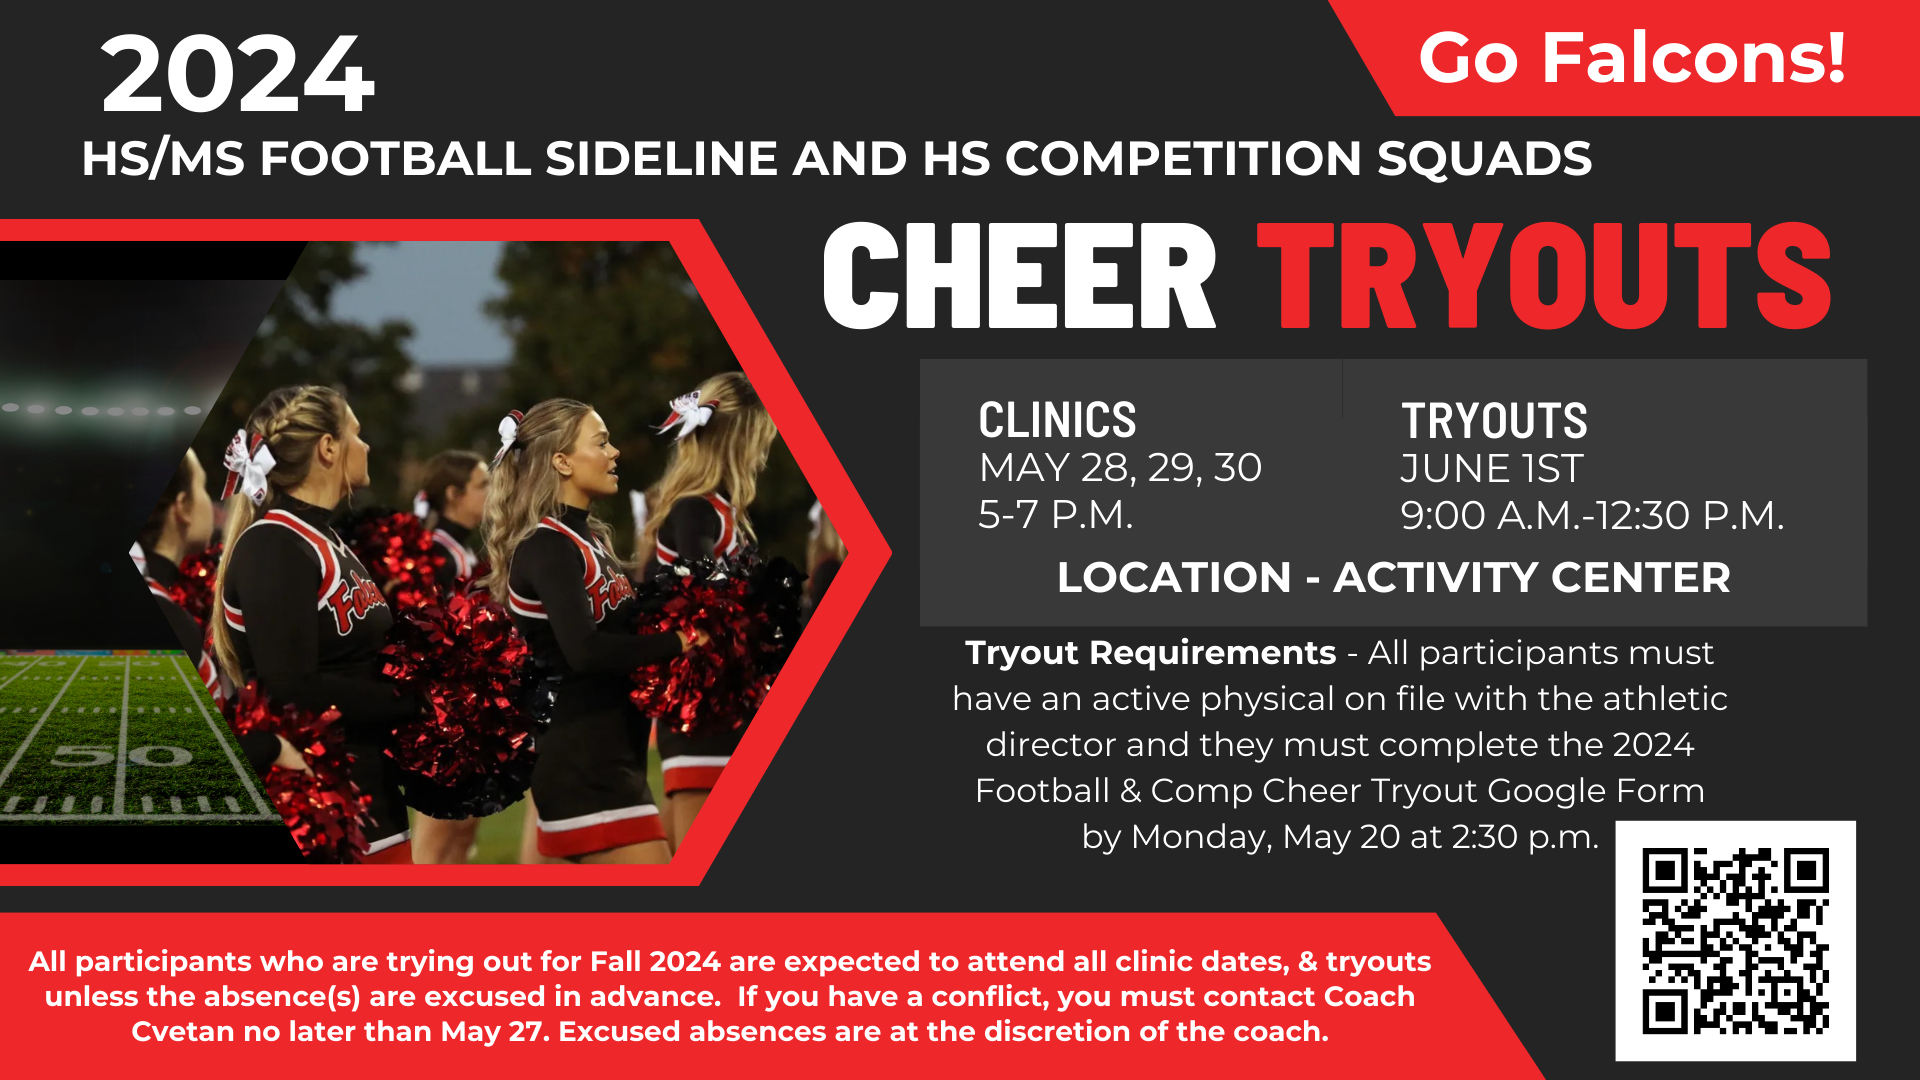 Football Cheer Tryouts May 28, 29 30 are clinics, June 1st are tryouts